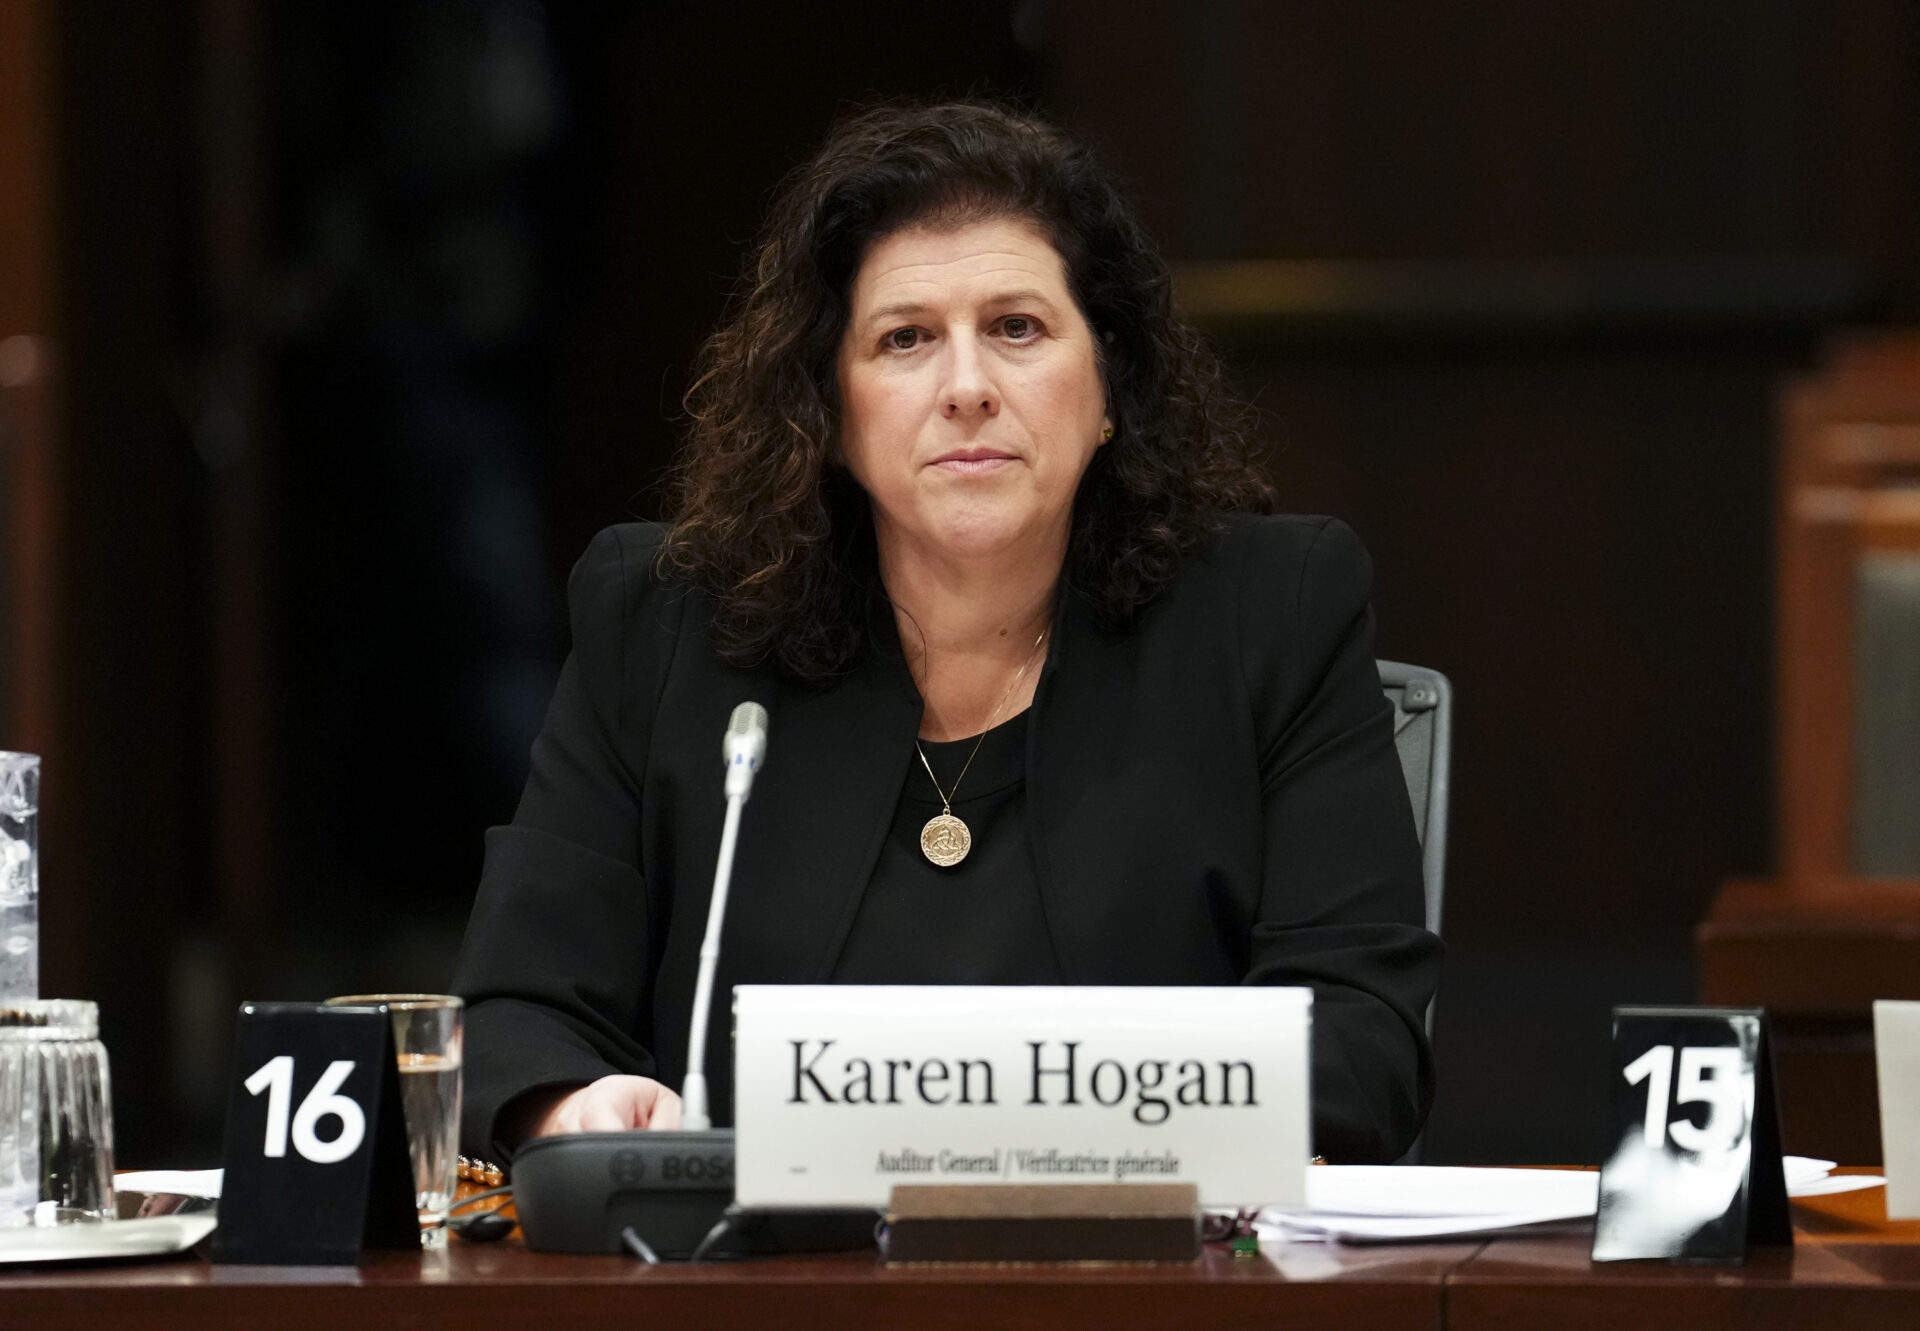 Hogan is sitting at a long dark wooden table with a thin microphone in front of her along with a small white nameplate sign, a glass of water and sheathes of paper laid out. She is dressed in black and is listening with an impassive expression. 